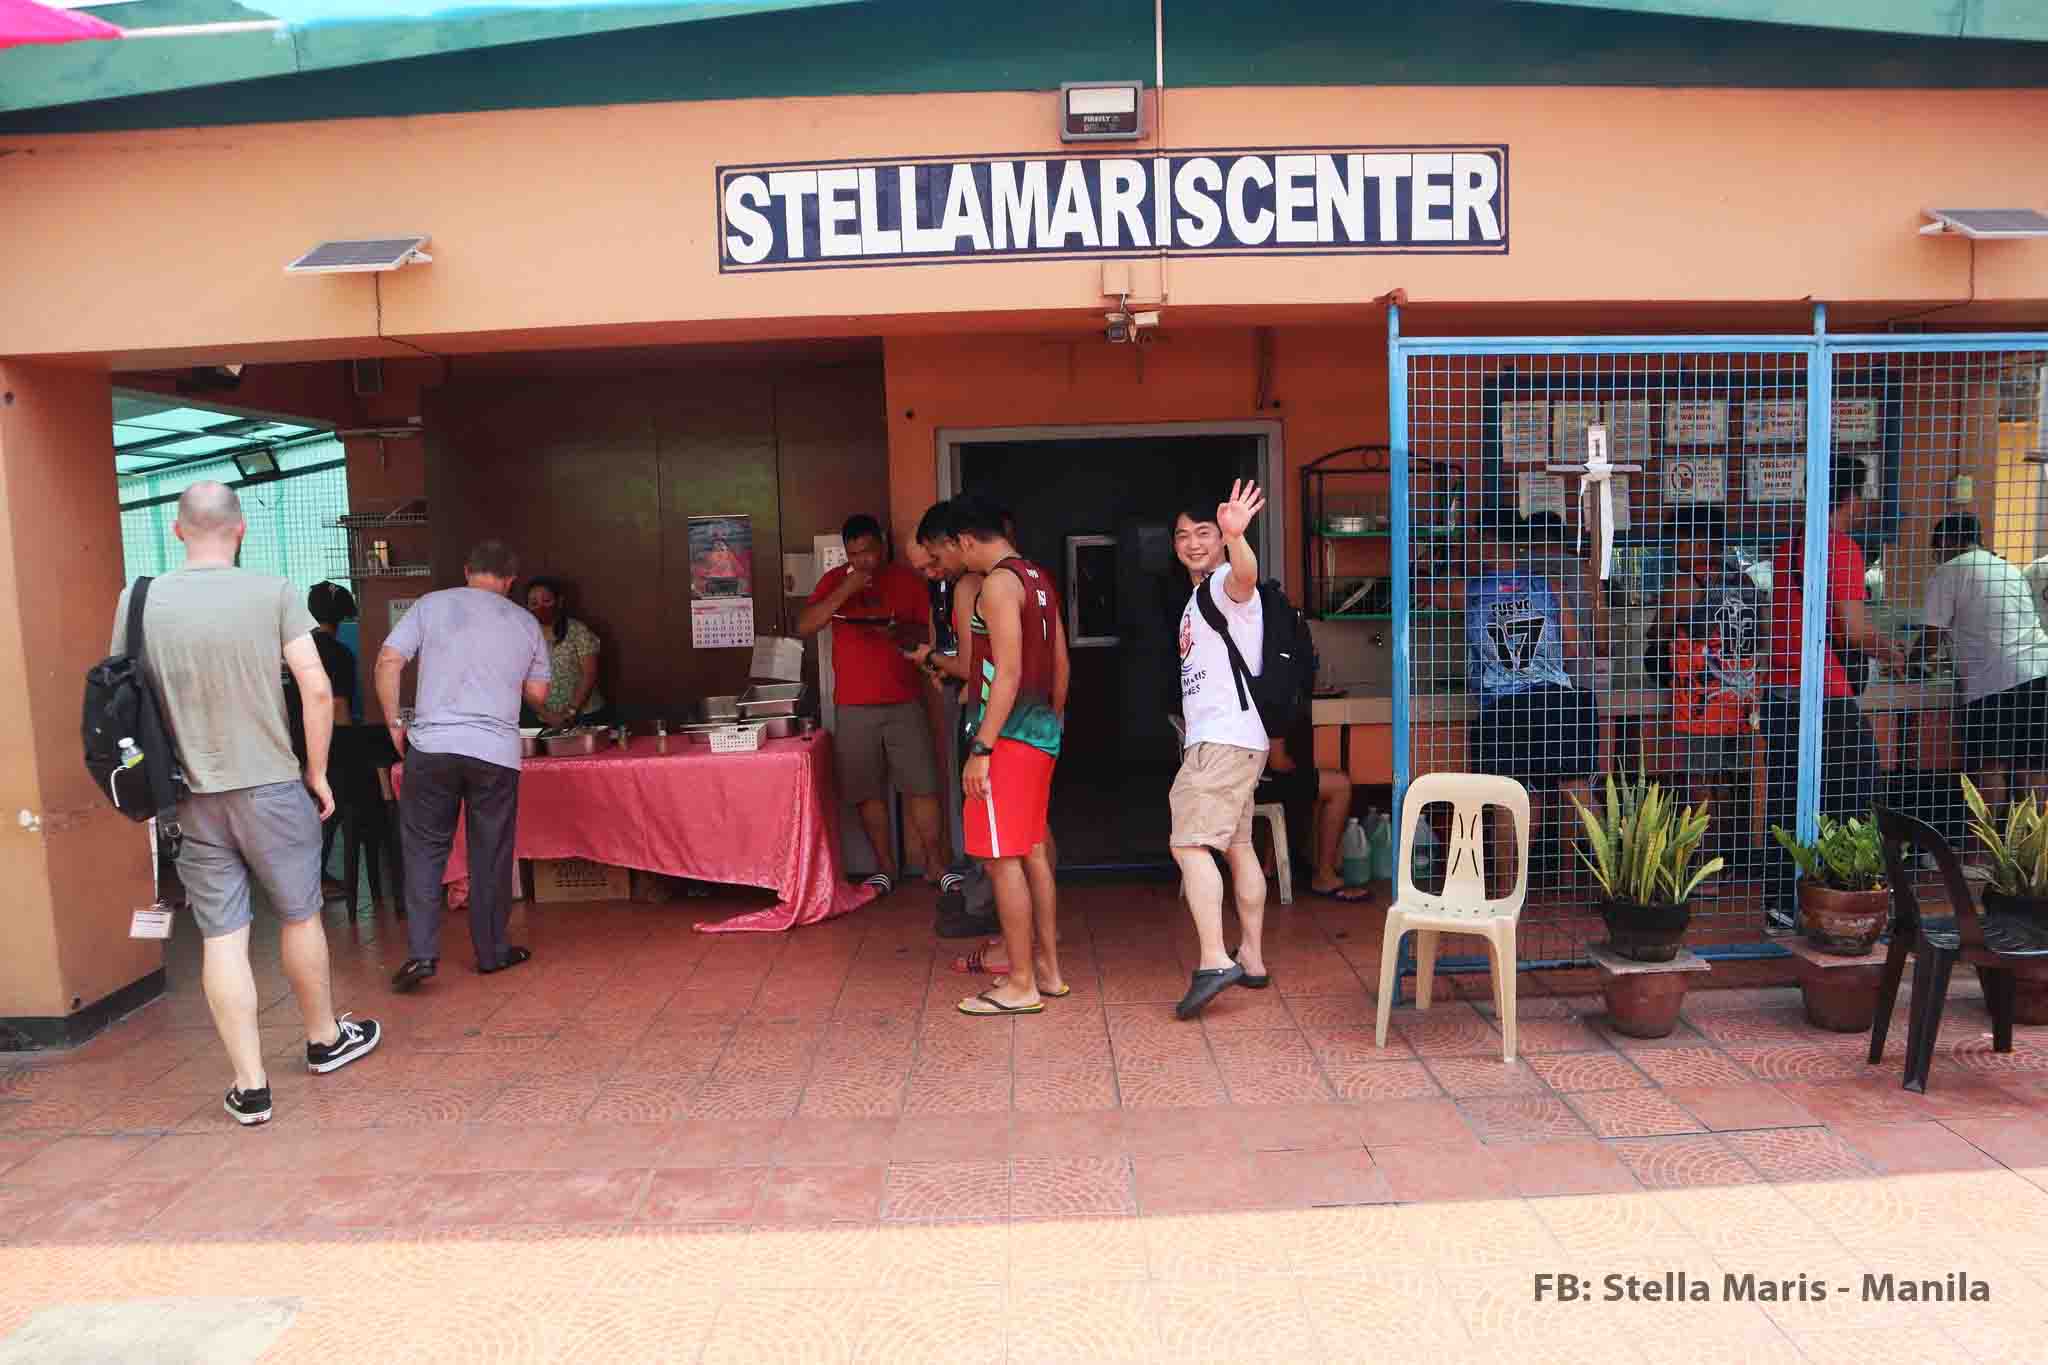 Seafarers falling in line to get a nice meal in Stella Maris Center Manila.